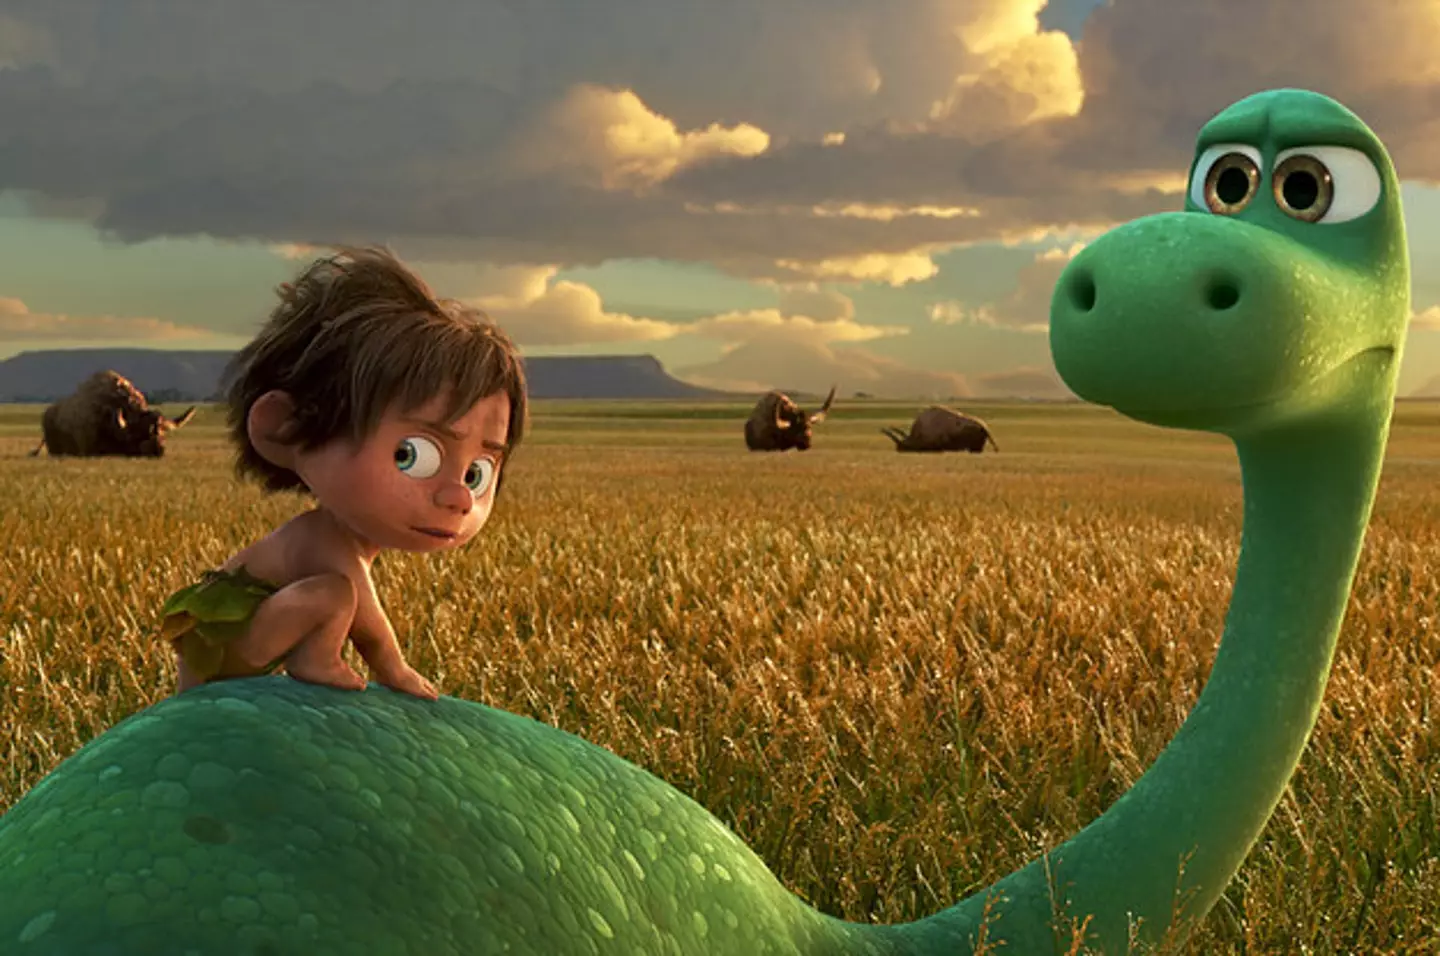 Fans had a bone to pick with The Good Dinosaur.